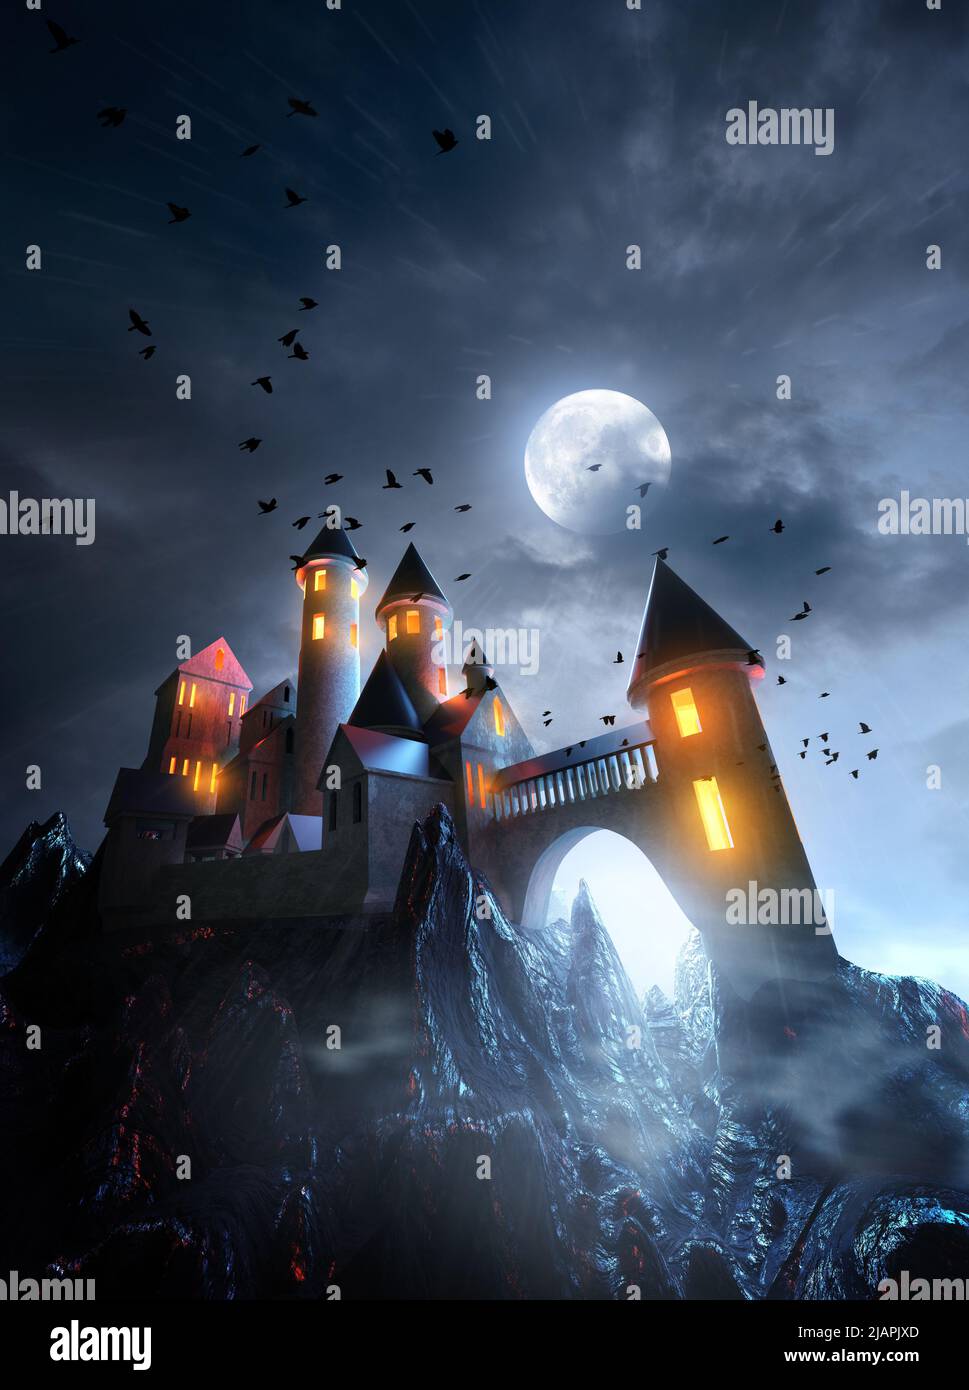 An ancient mythical castle placed high up on a cliff edge as a storm comes in at night. 3D illustration. Stock Photo